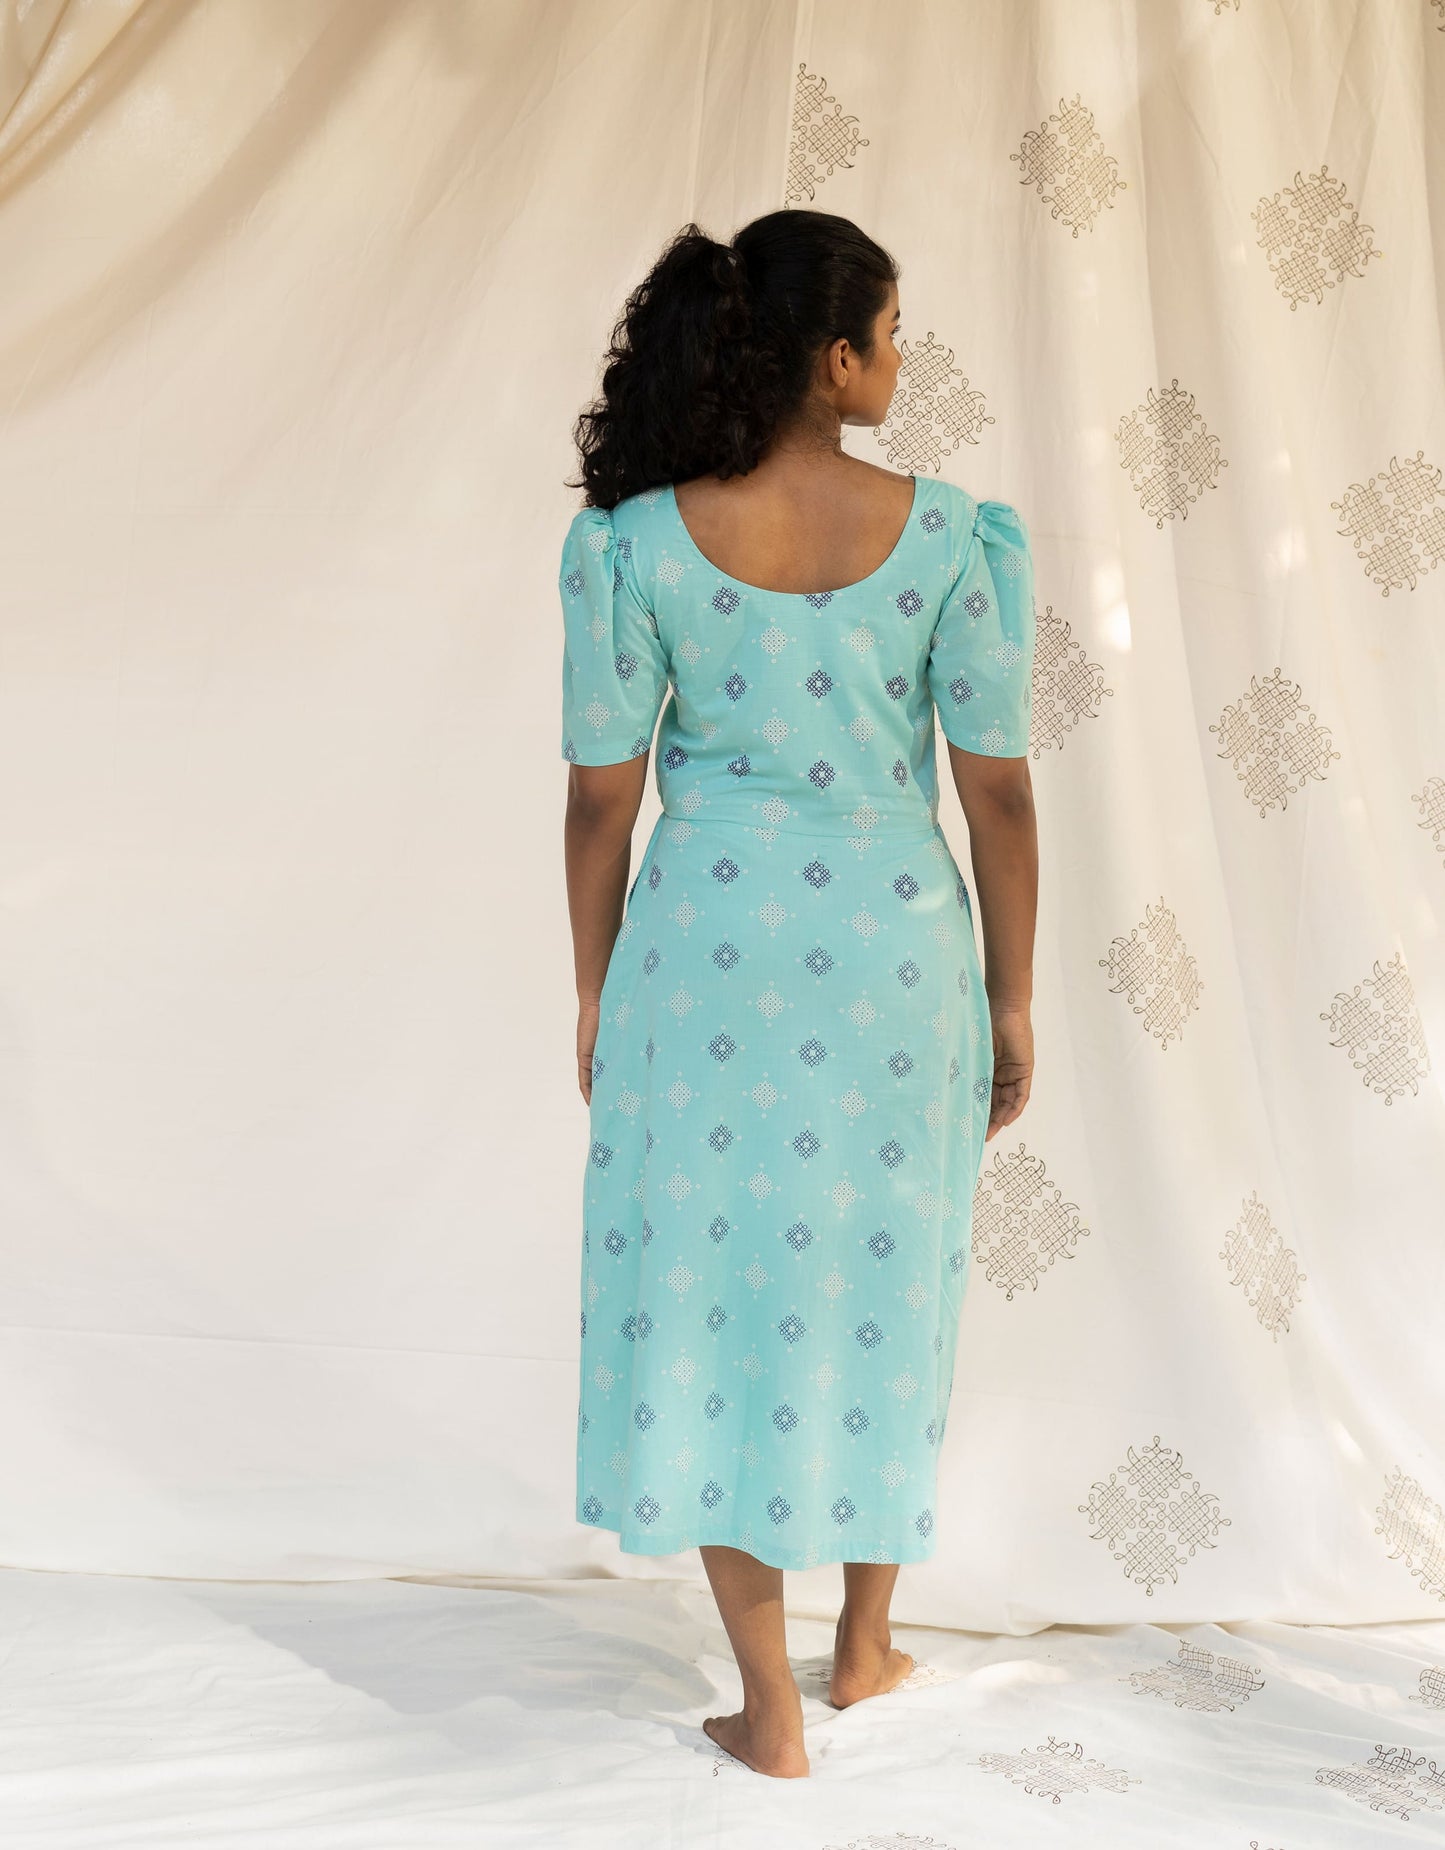 Hueloom Mint Blue Reversible  Cut-out Dress back view without cut in the centre